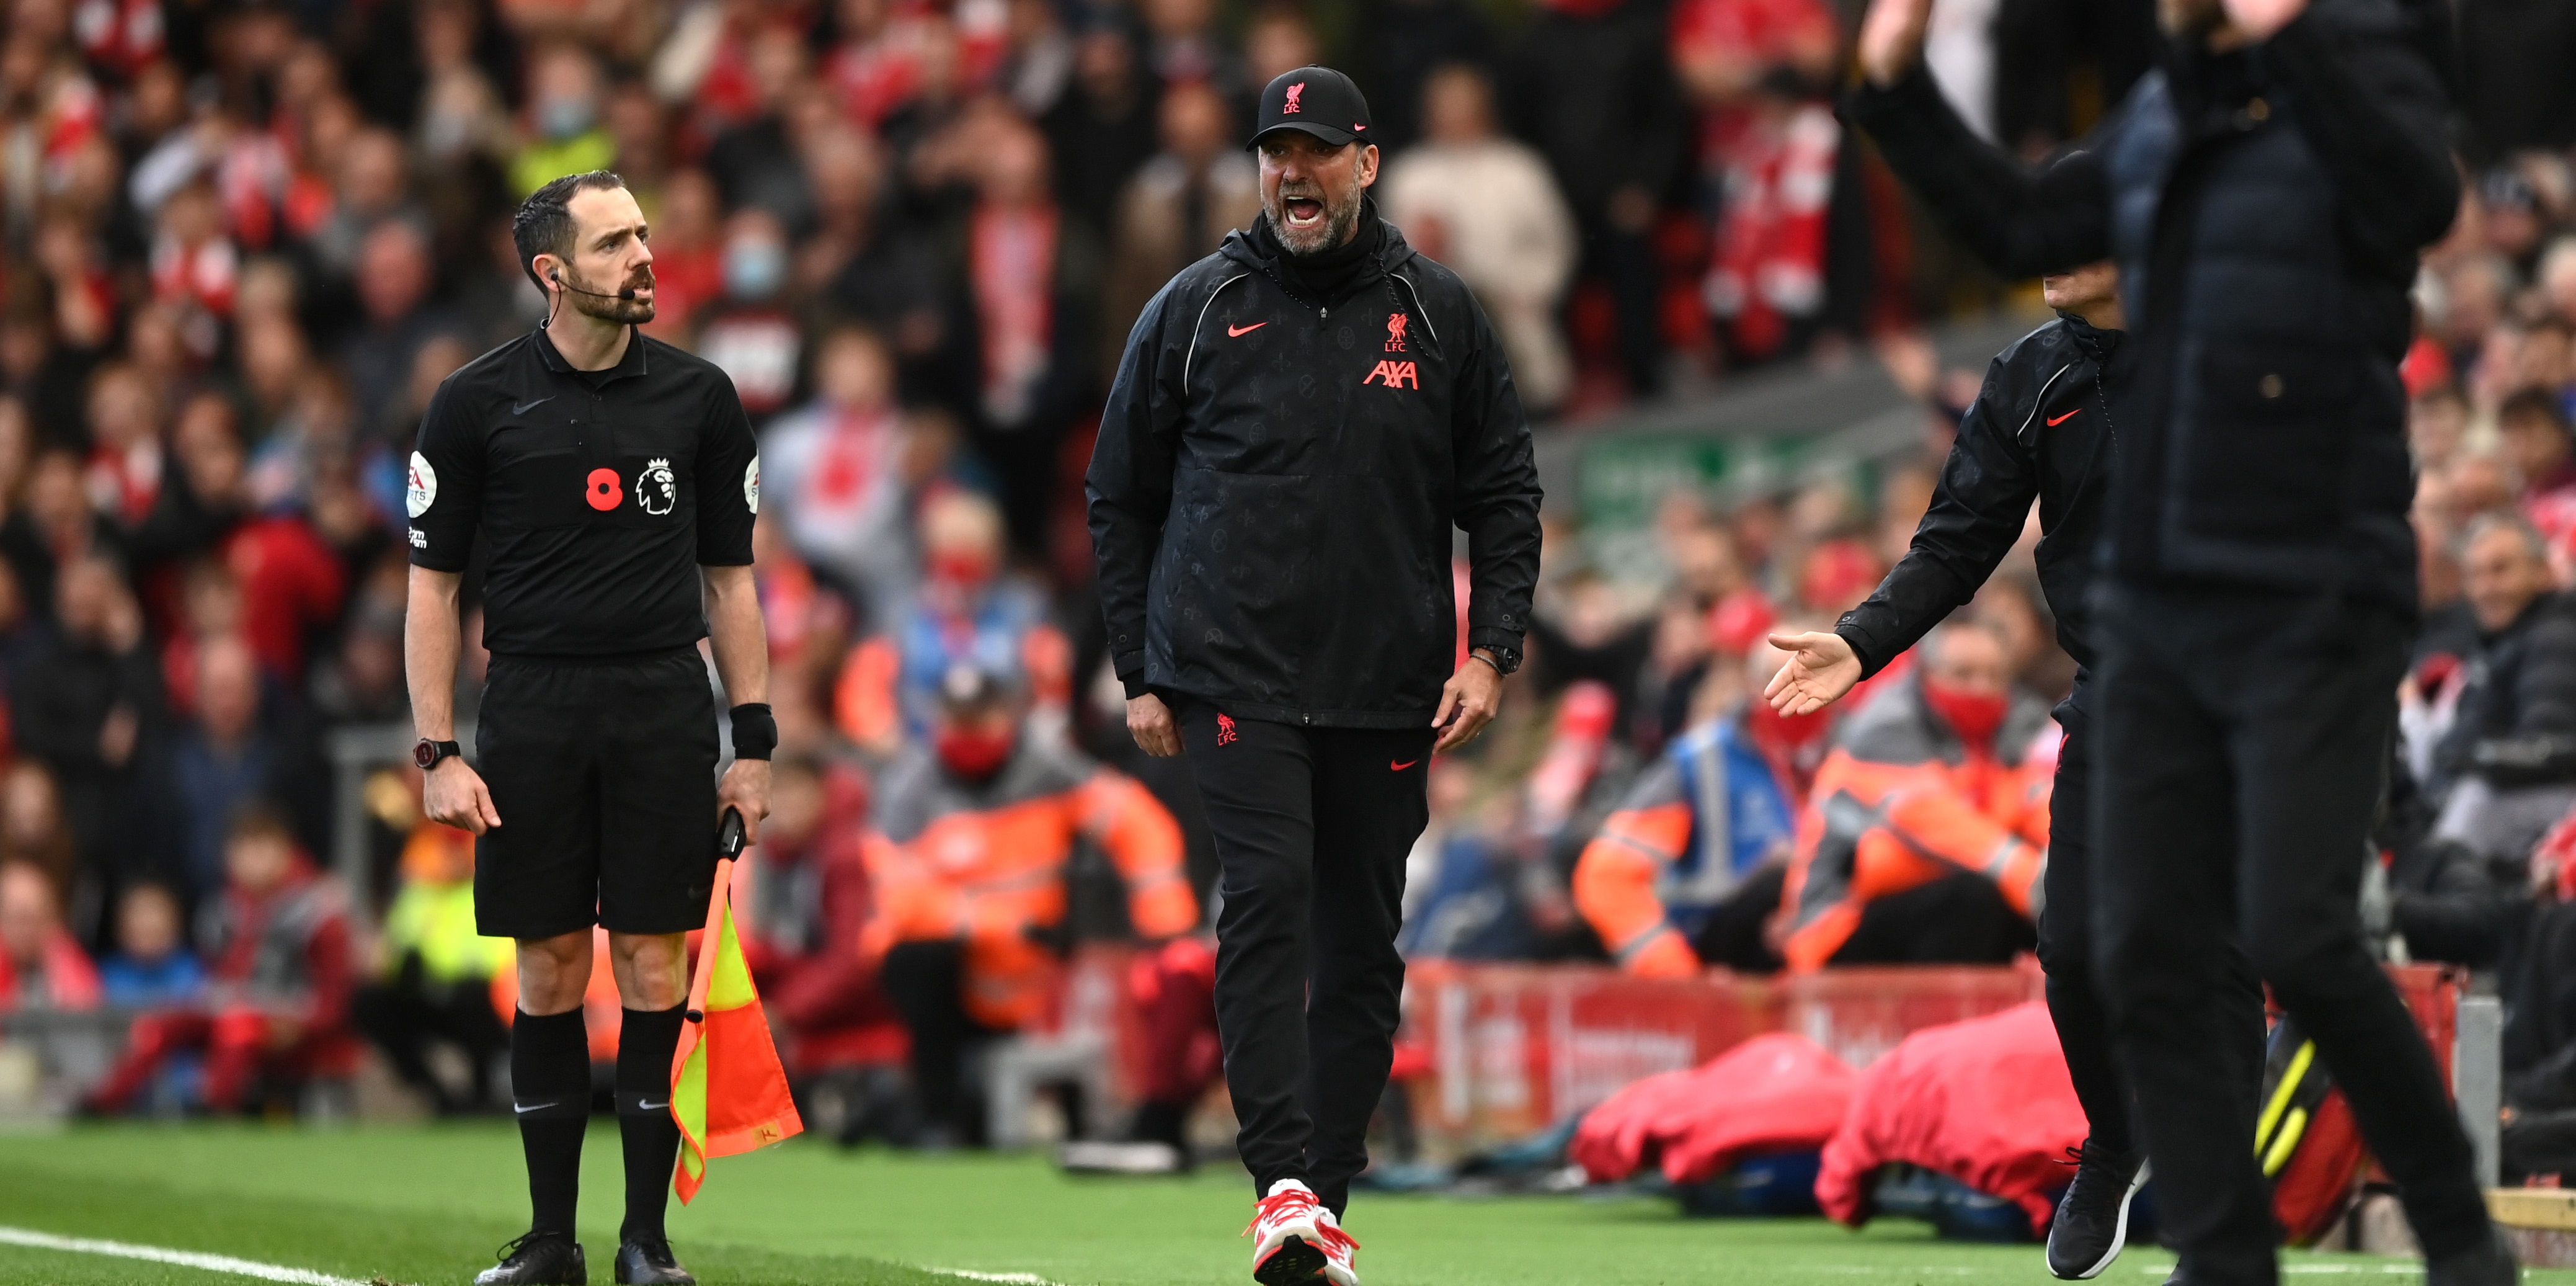 Klopp hoping his side ‘put a few things right’ as Liverpool welcome Arsenal to Anfield